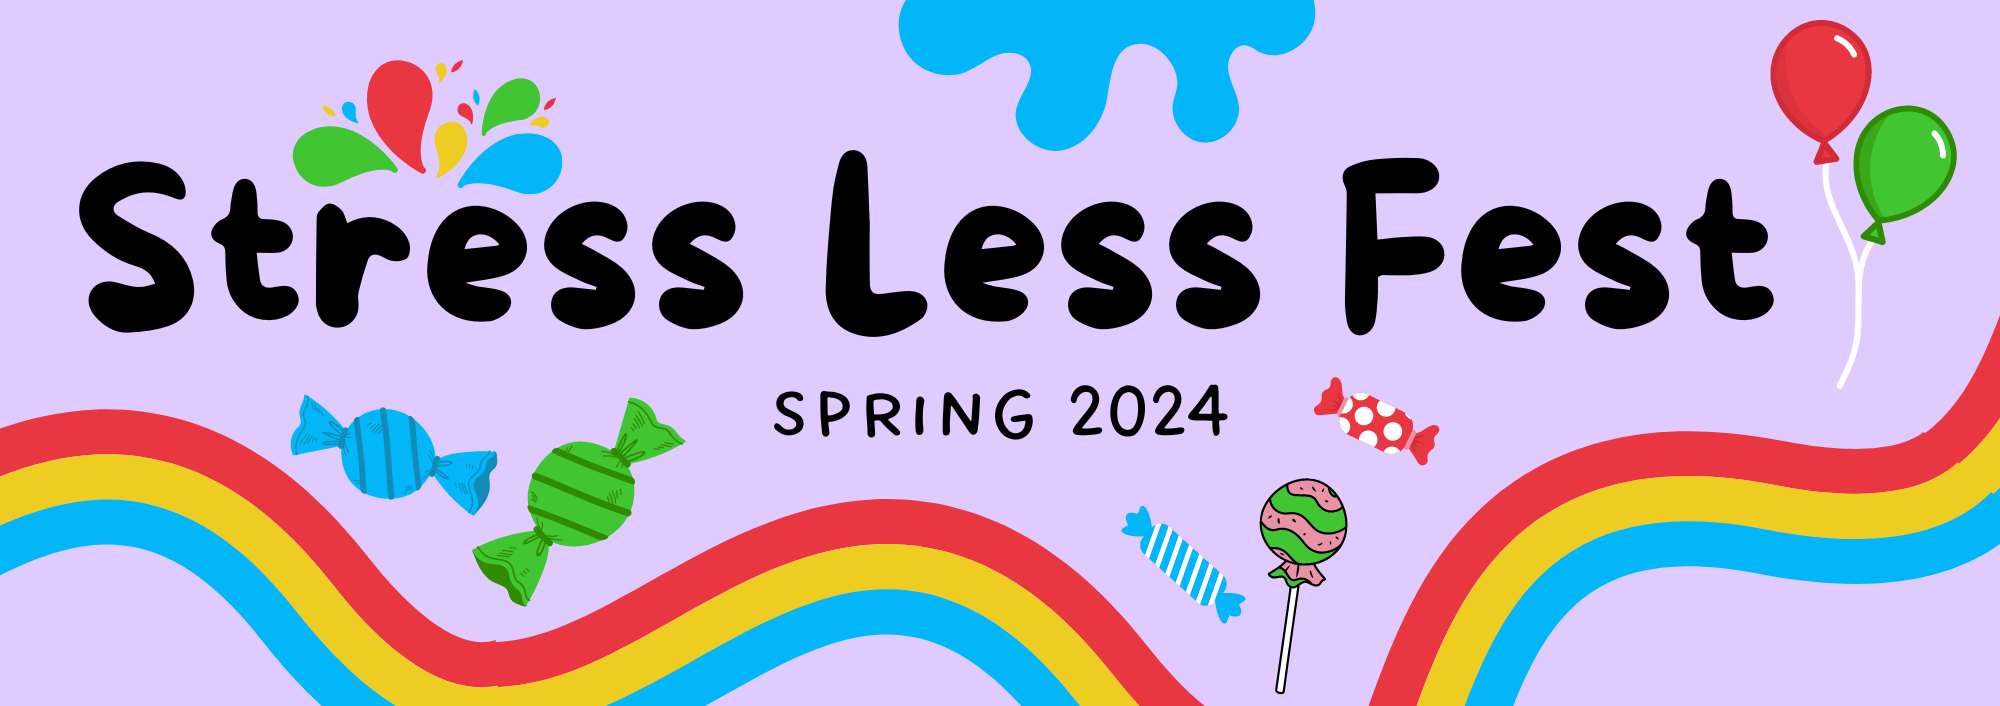 stress-less-fest-spring-2024-8.5-x-3-in.png